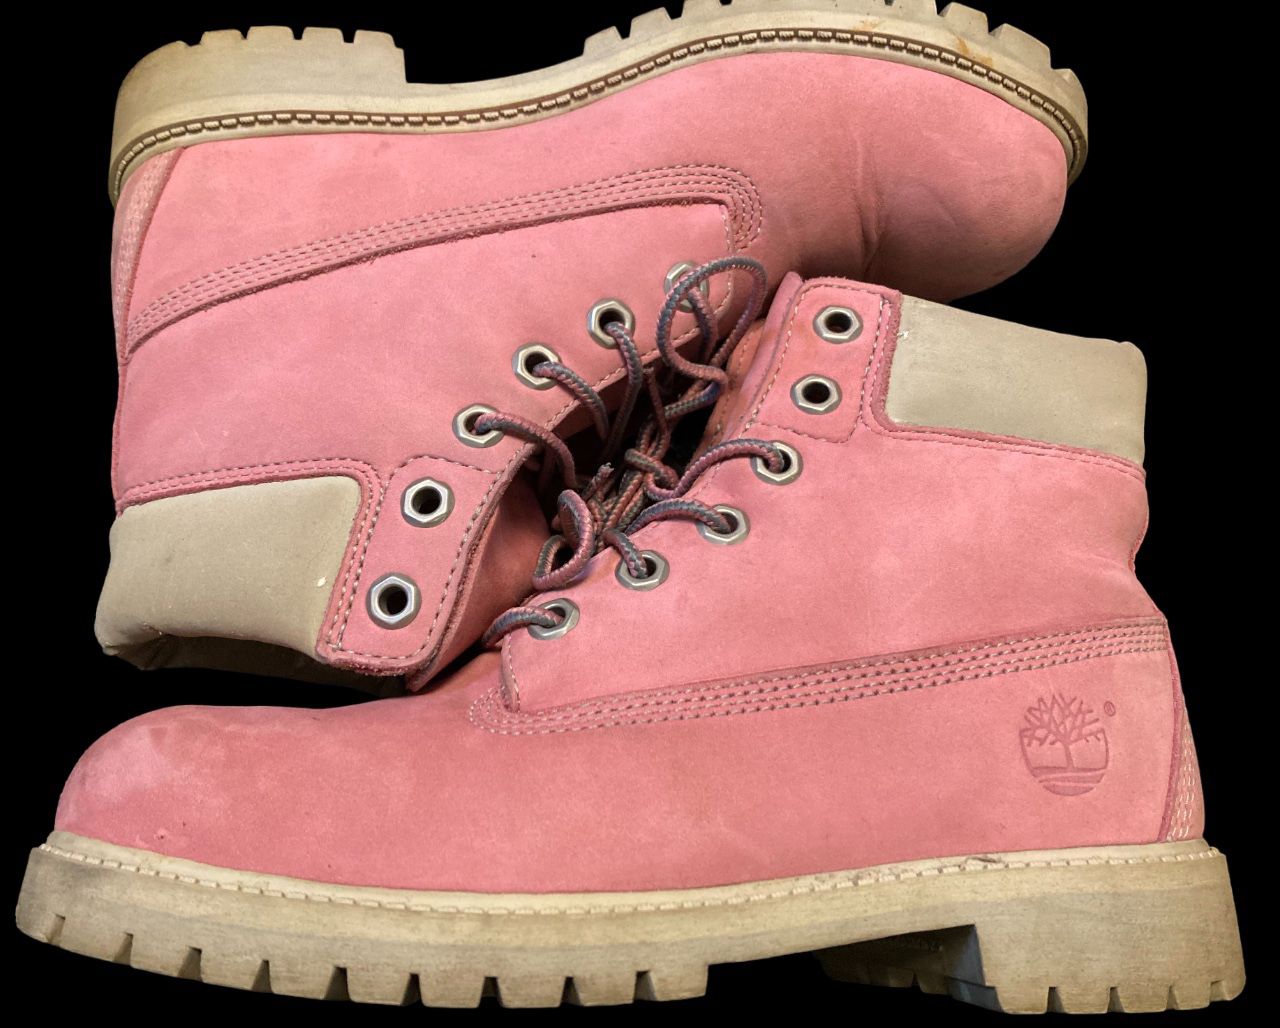 Pink Timberland Work Boots Nubuck Leather Clean 5M